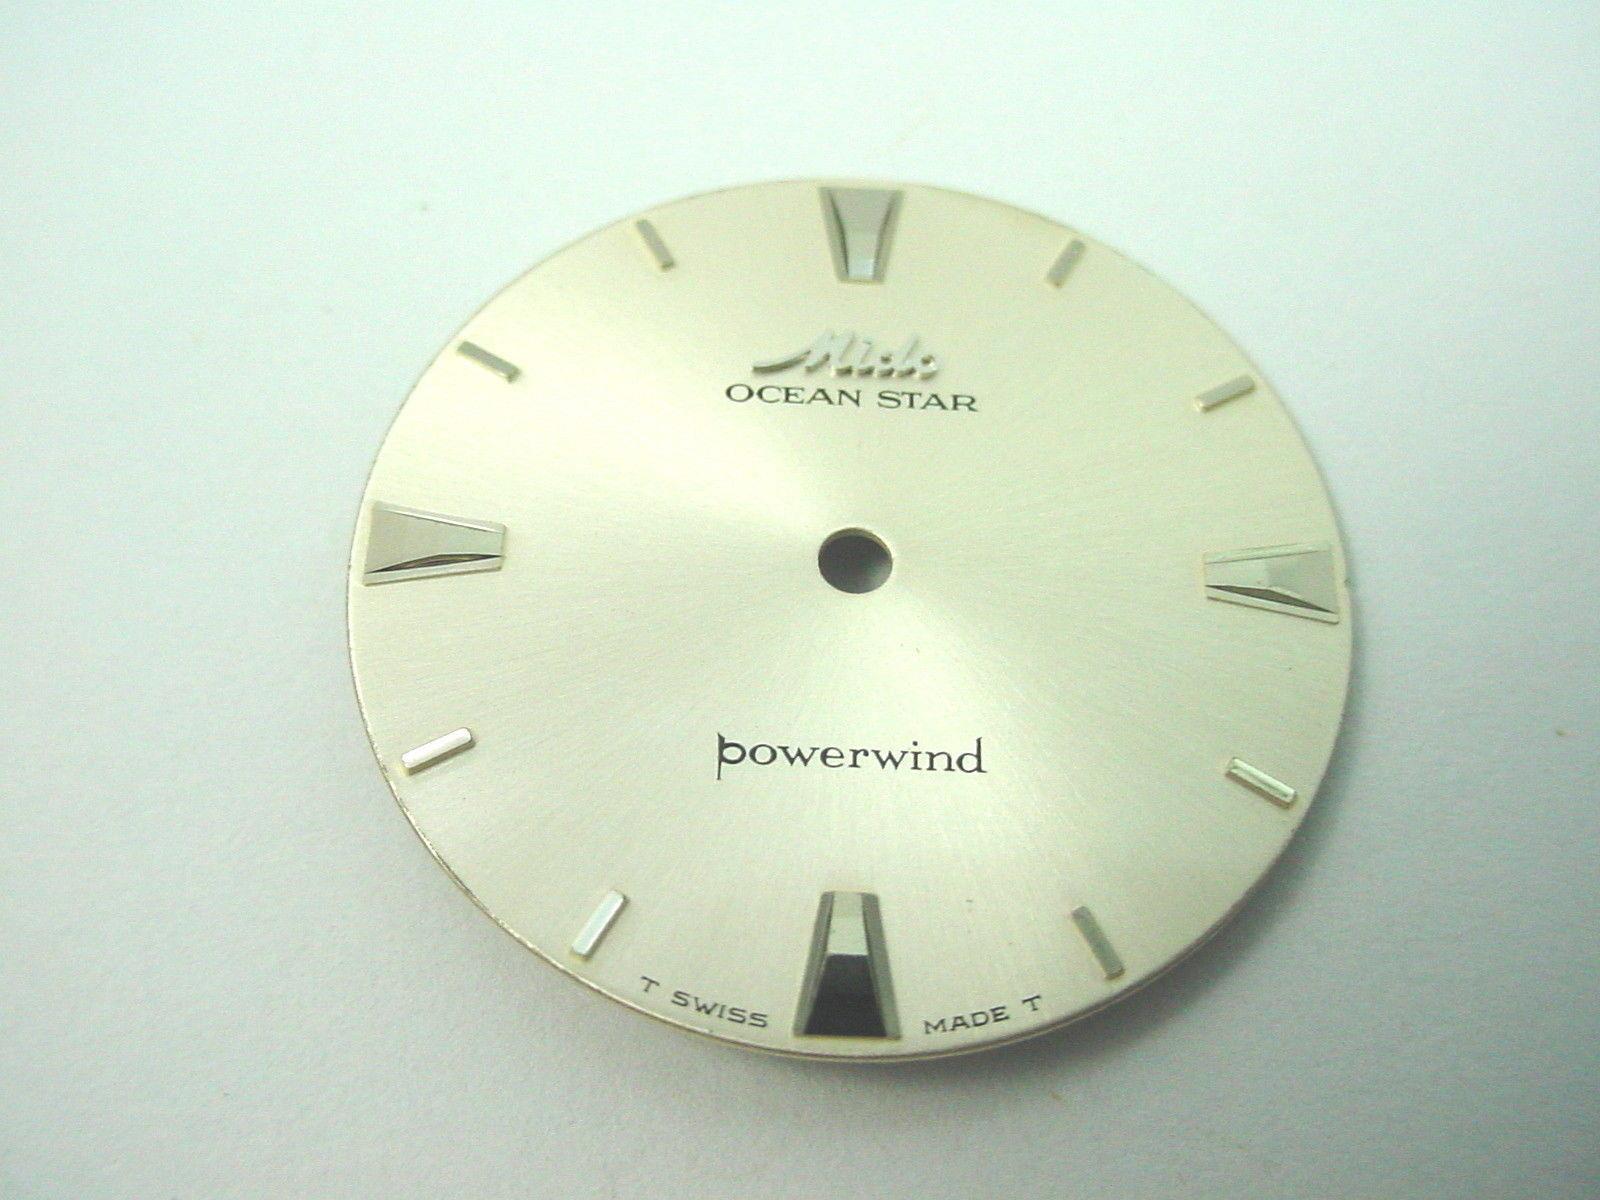 27.83mm Watch Dial Vintage Pearl Mido Ocean Star Powerwind Silver Stick Markers